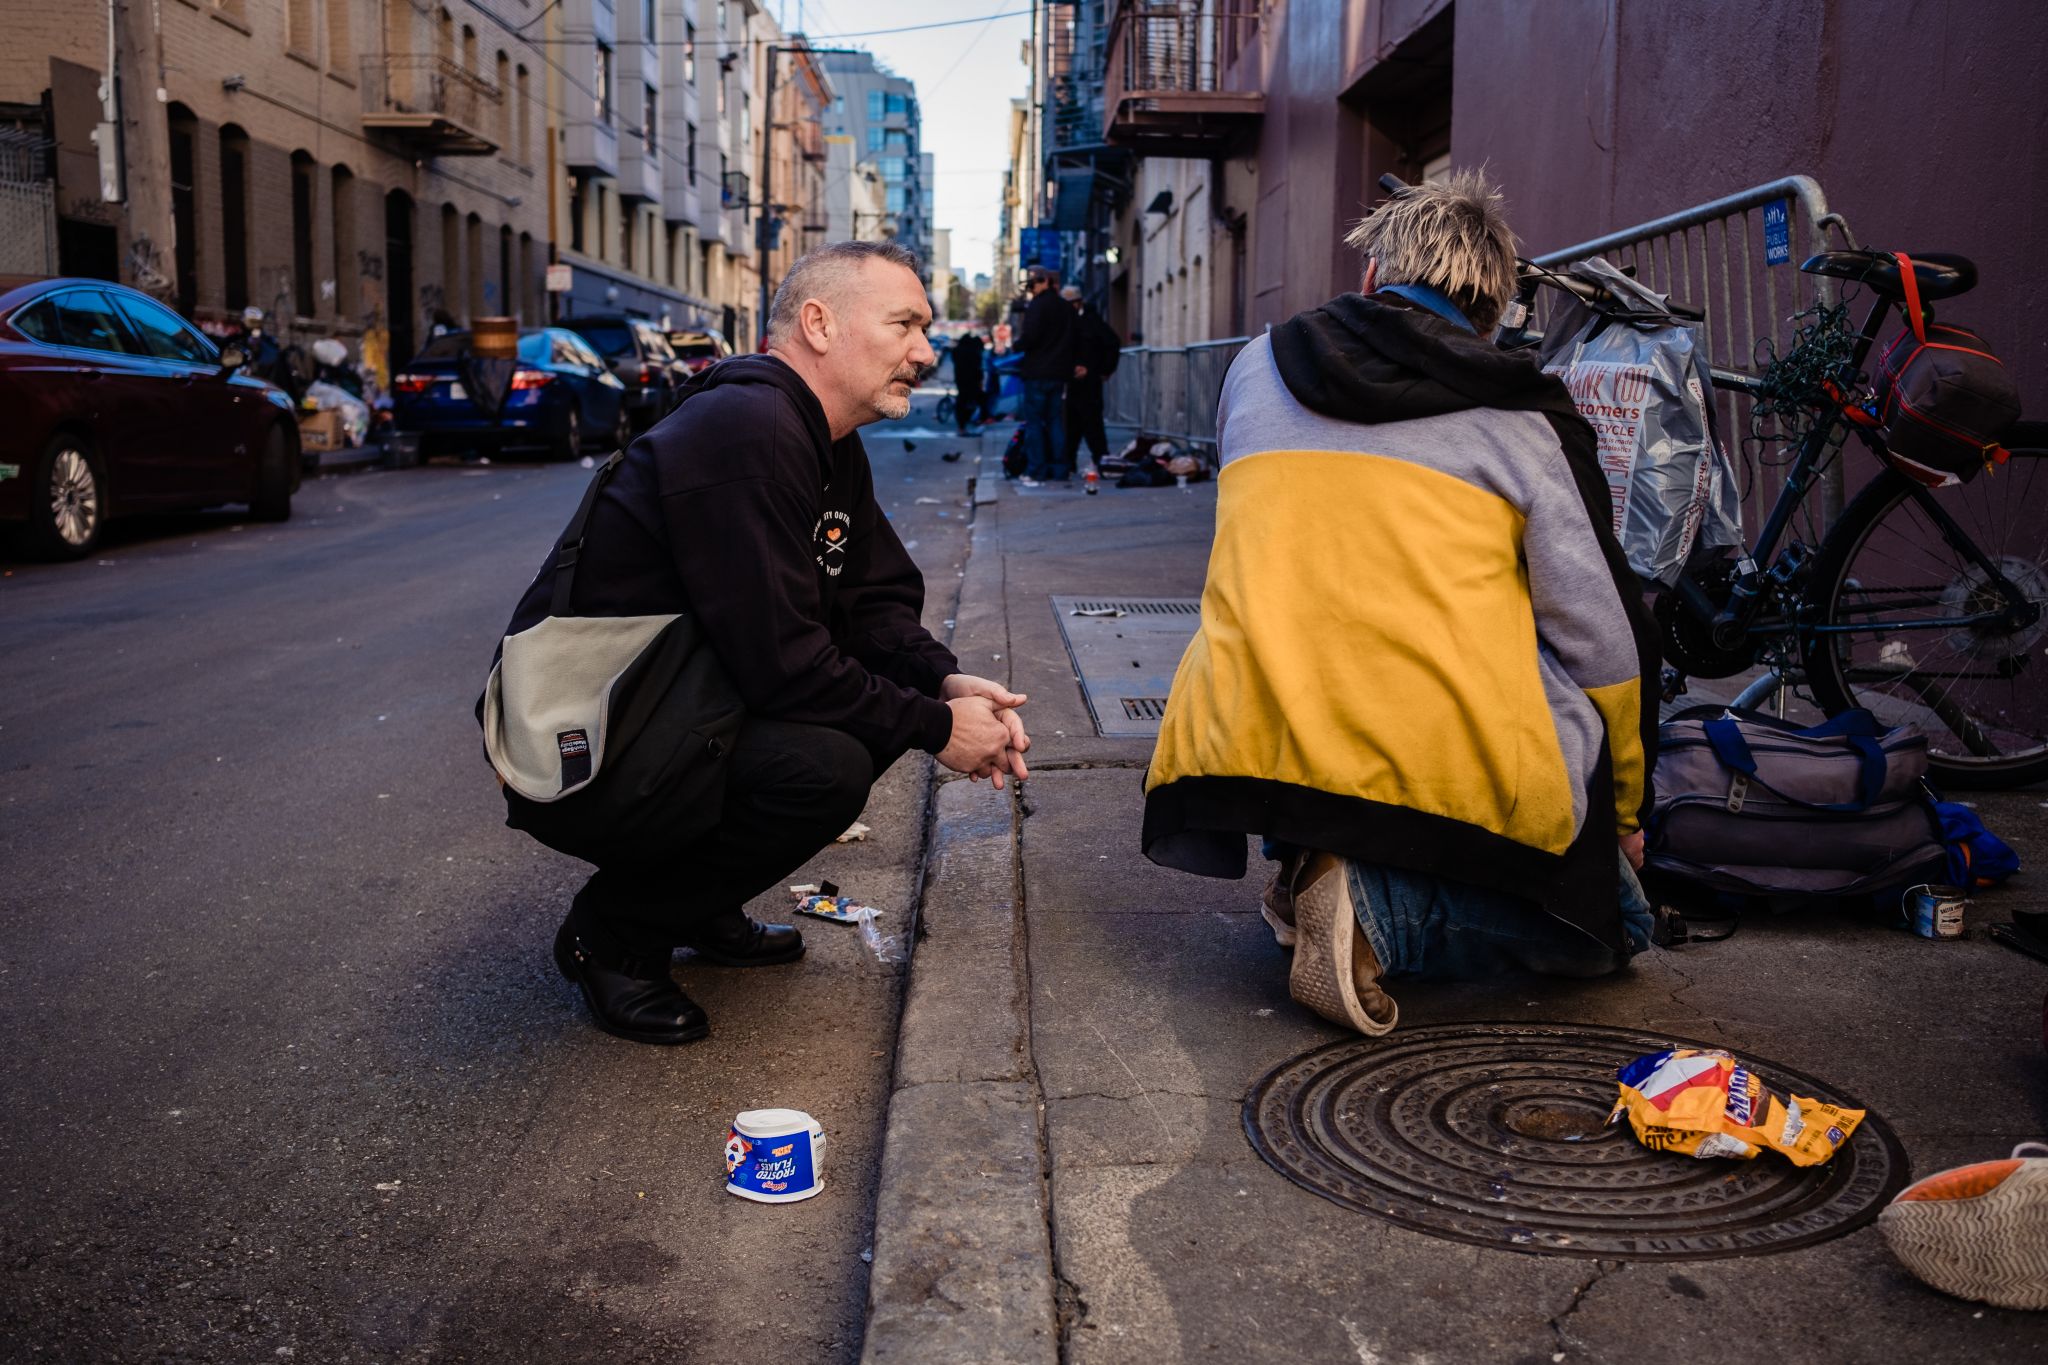 Fentanyl-plagued San Francisco bracing for new street drugs